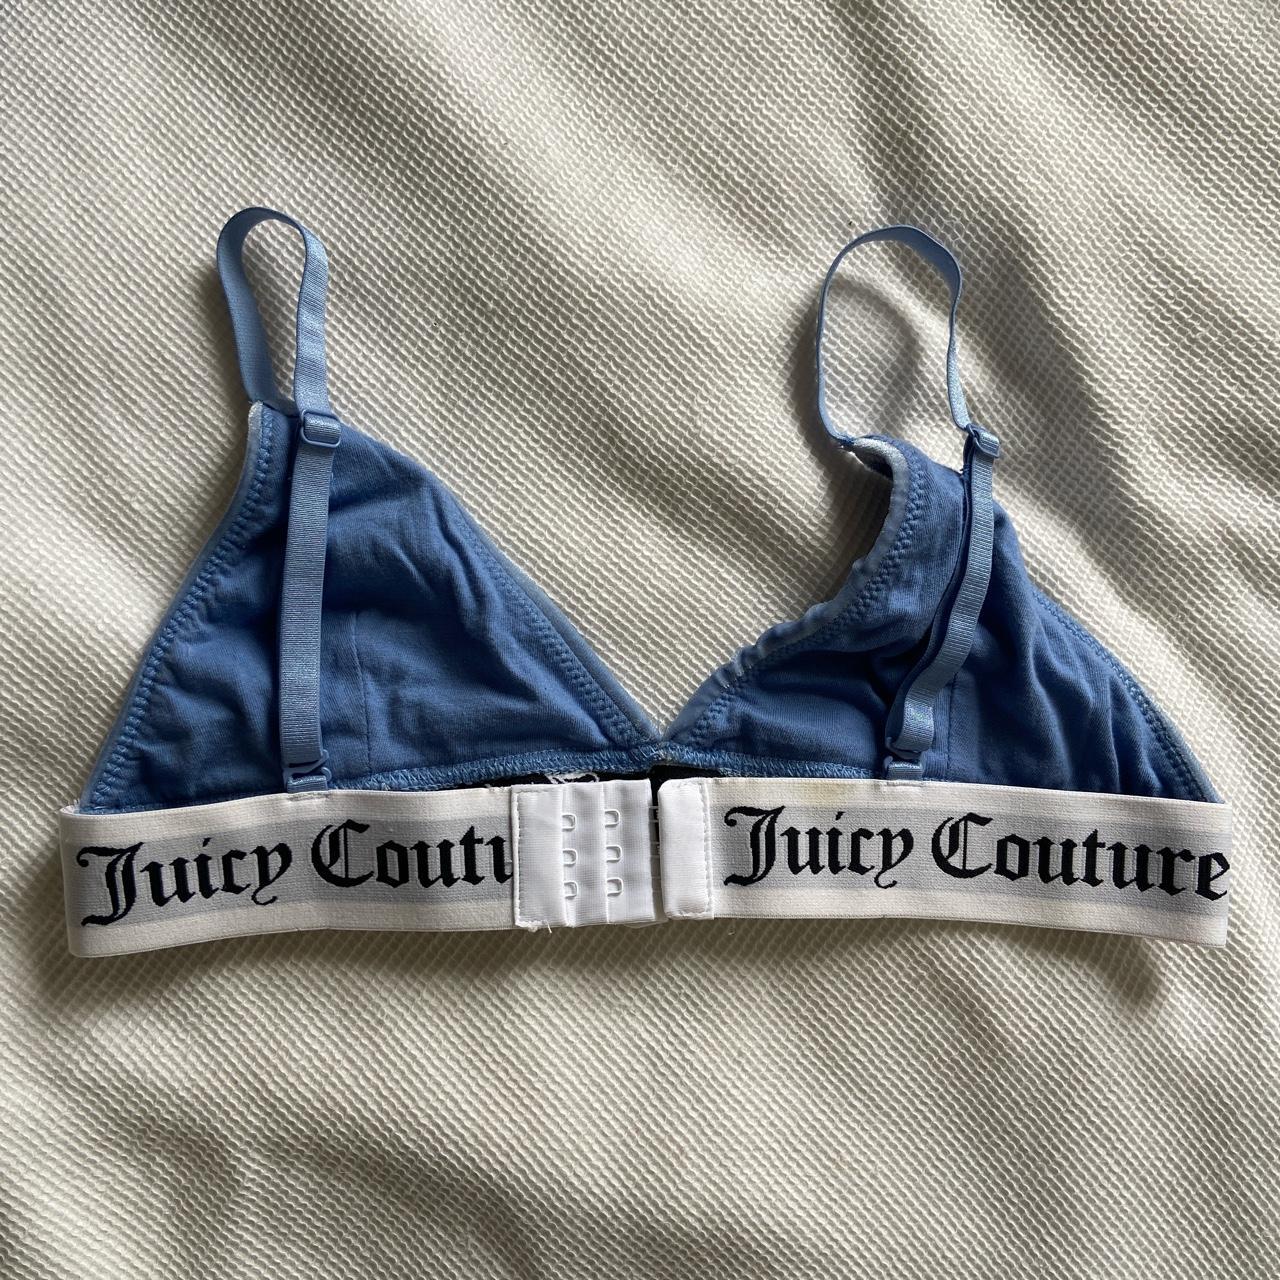 Blue velvet triangle Juicy Couture lounge bra. Never